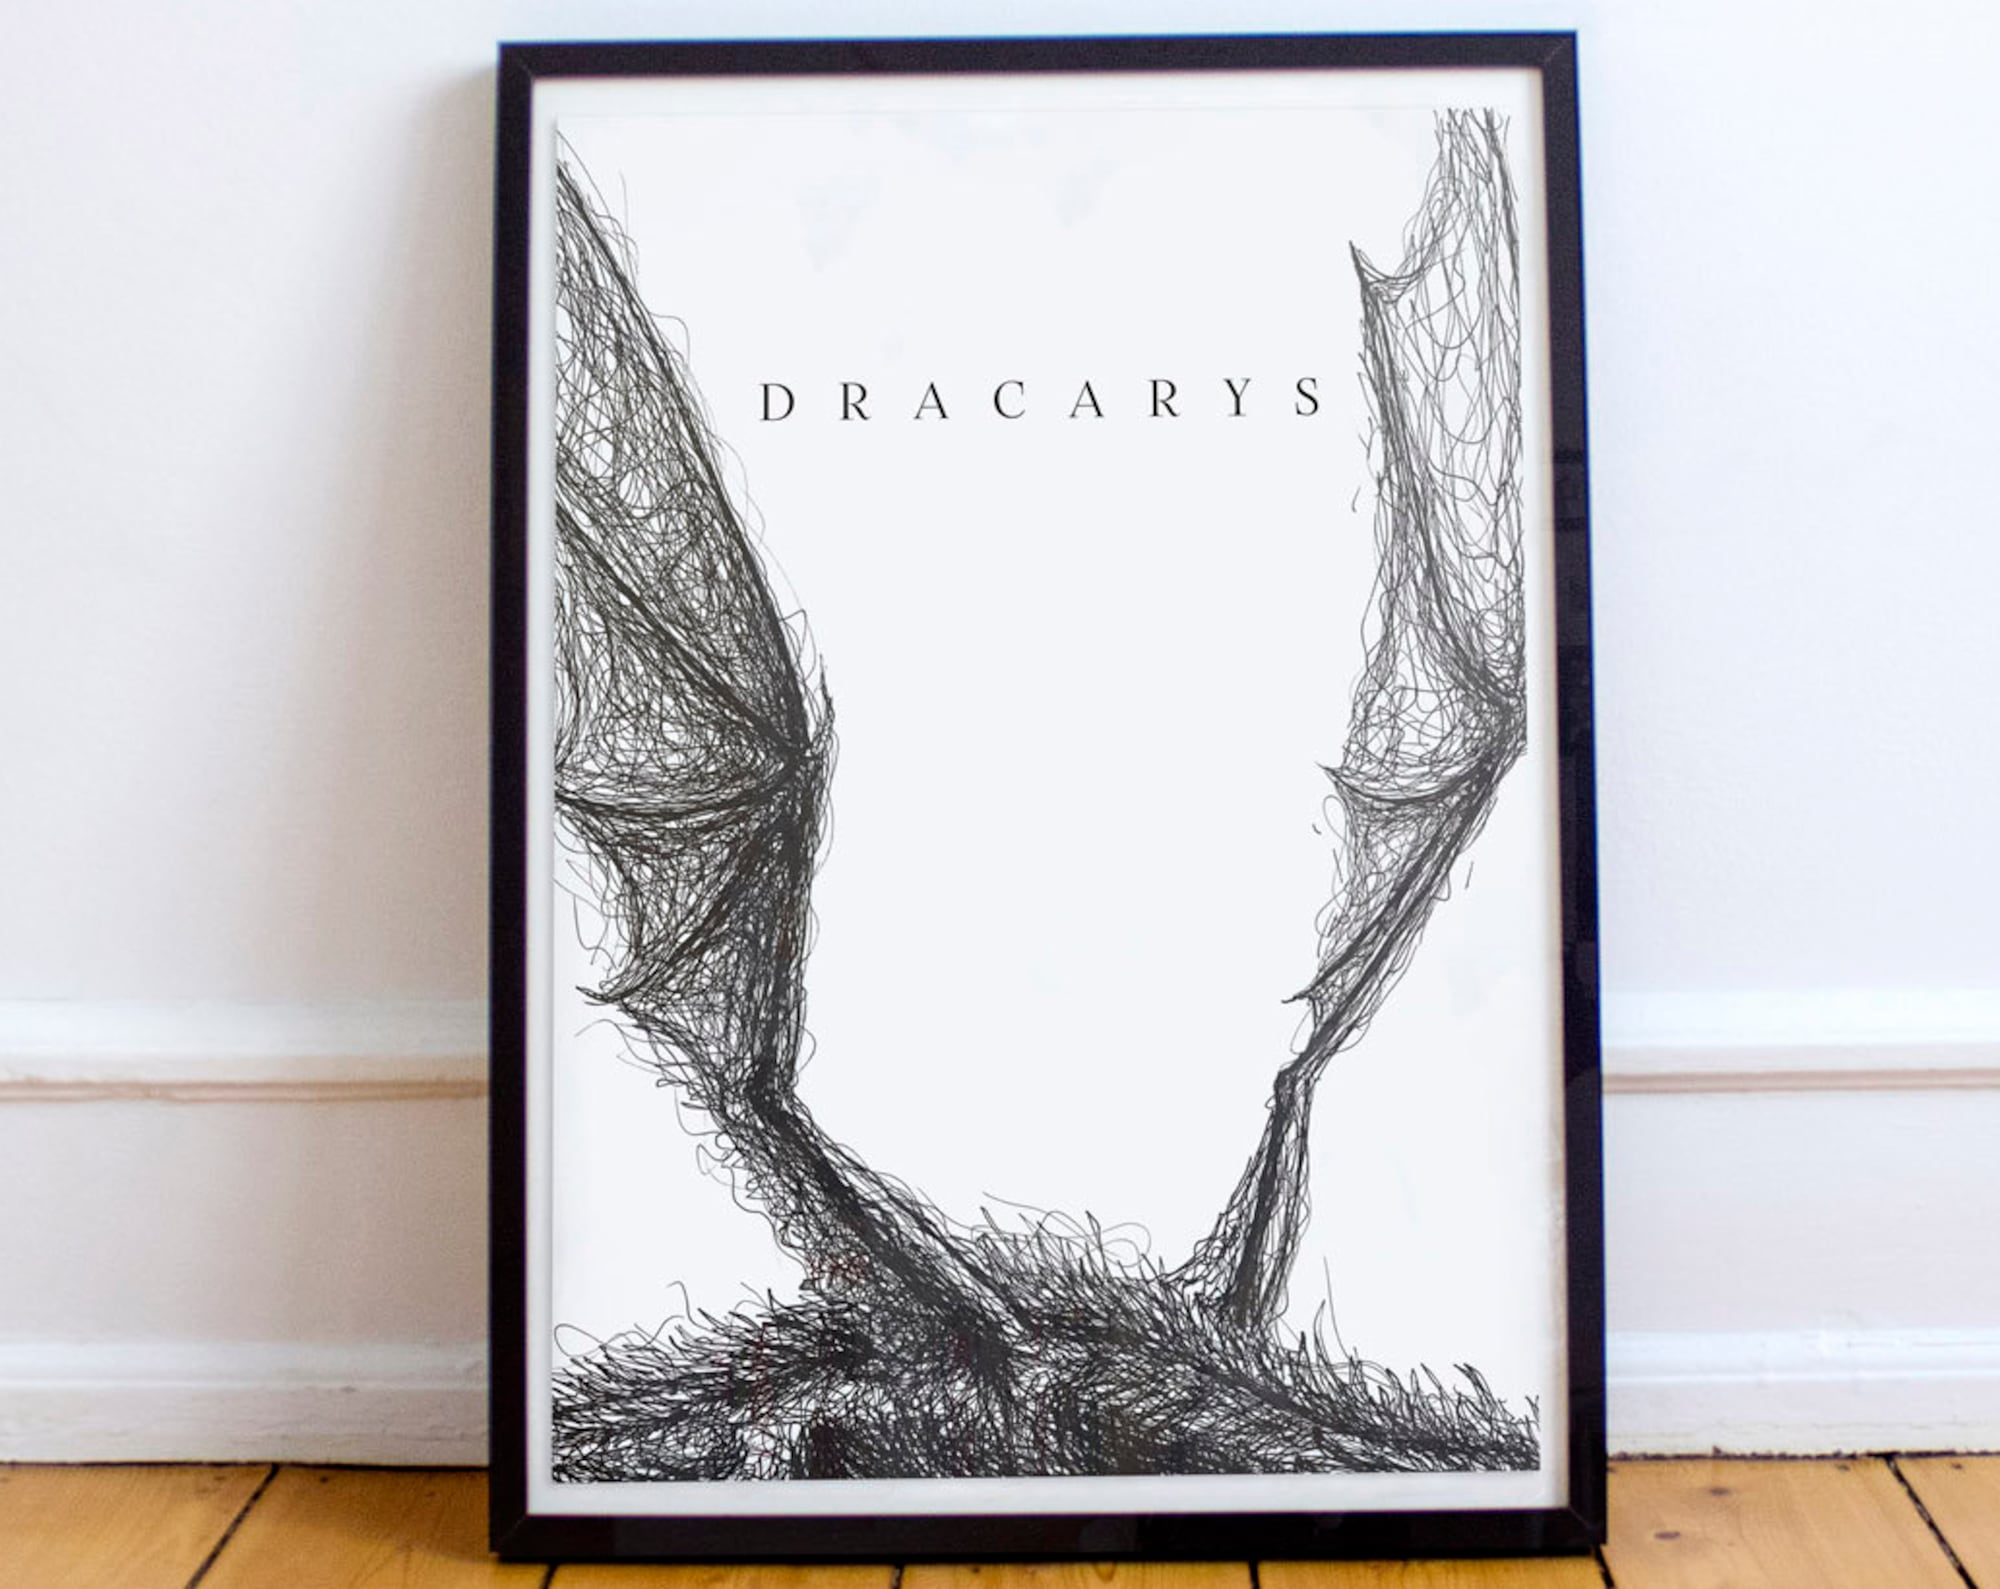 Game Of Thrones Poster - Dracarys - Khaleesi - Mother of Dragons